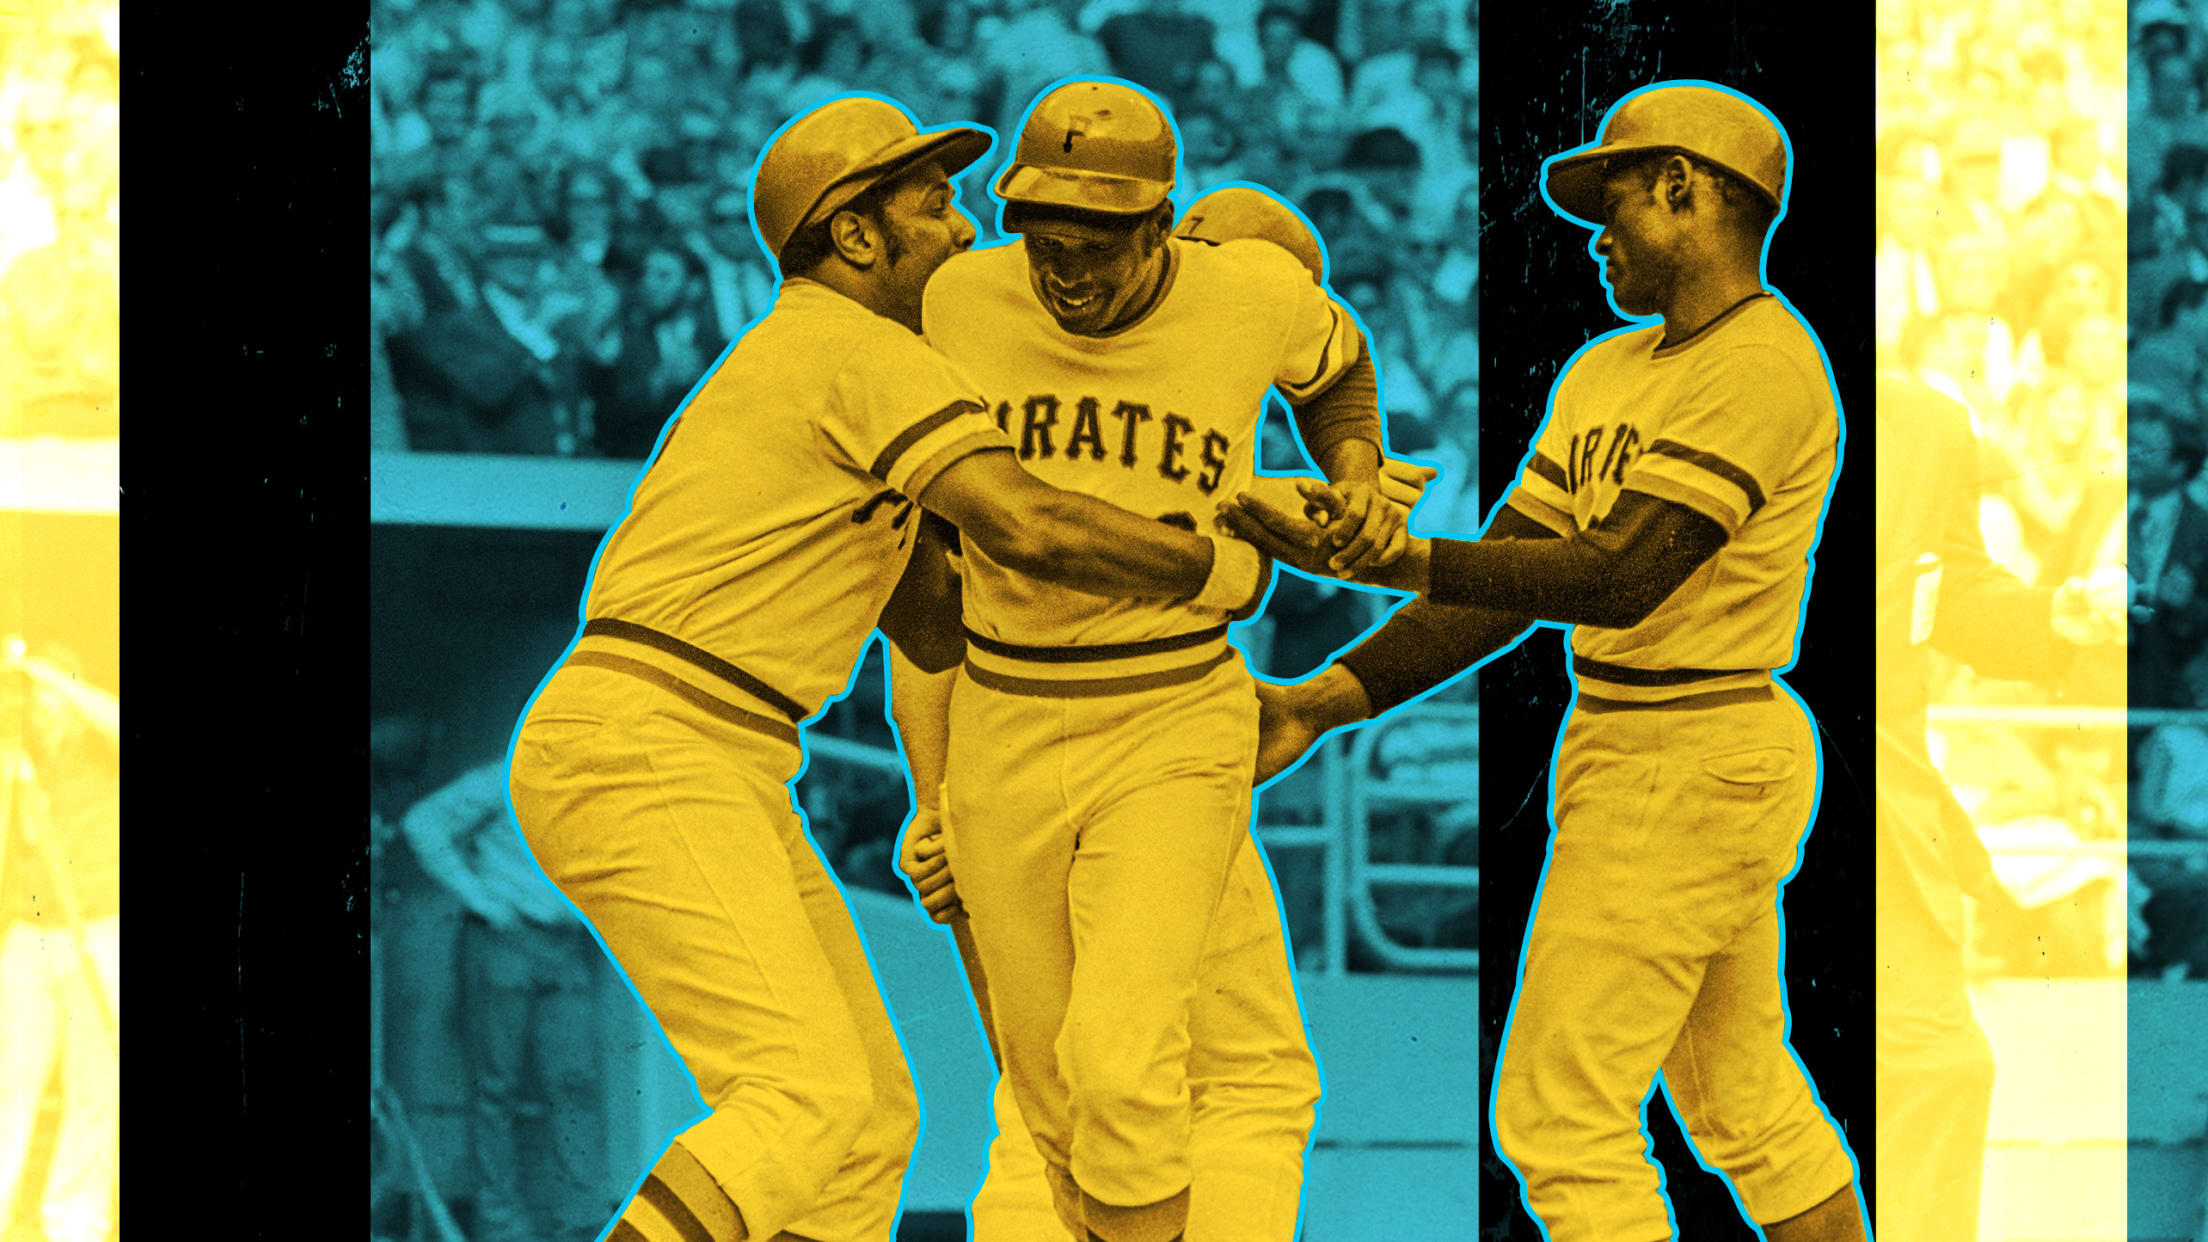 On Sept. 1, 1971, the Pirates made history with baseball's 1st all-minority  starting lineup